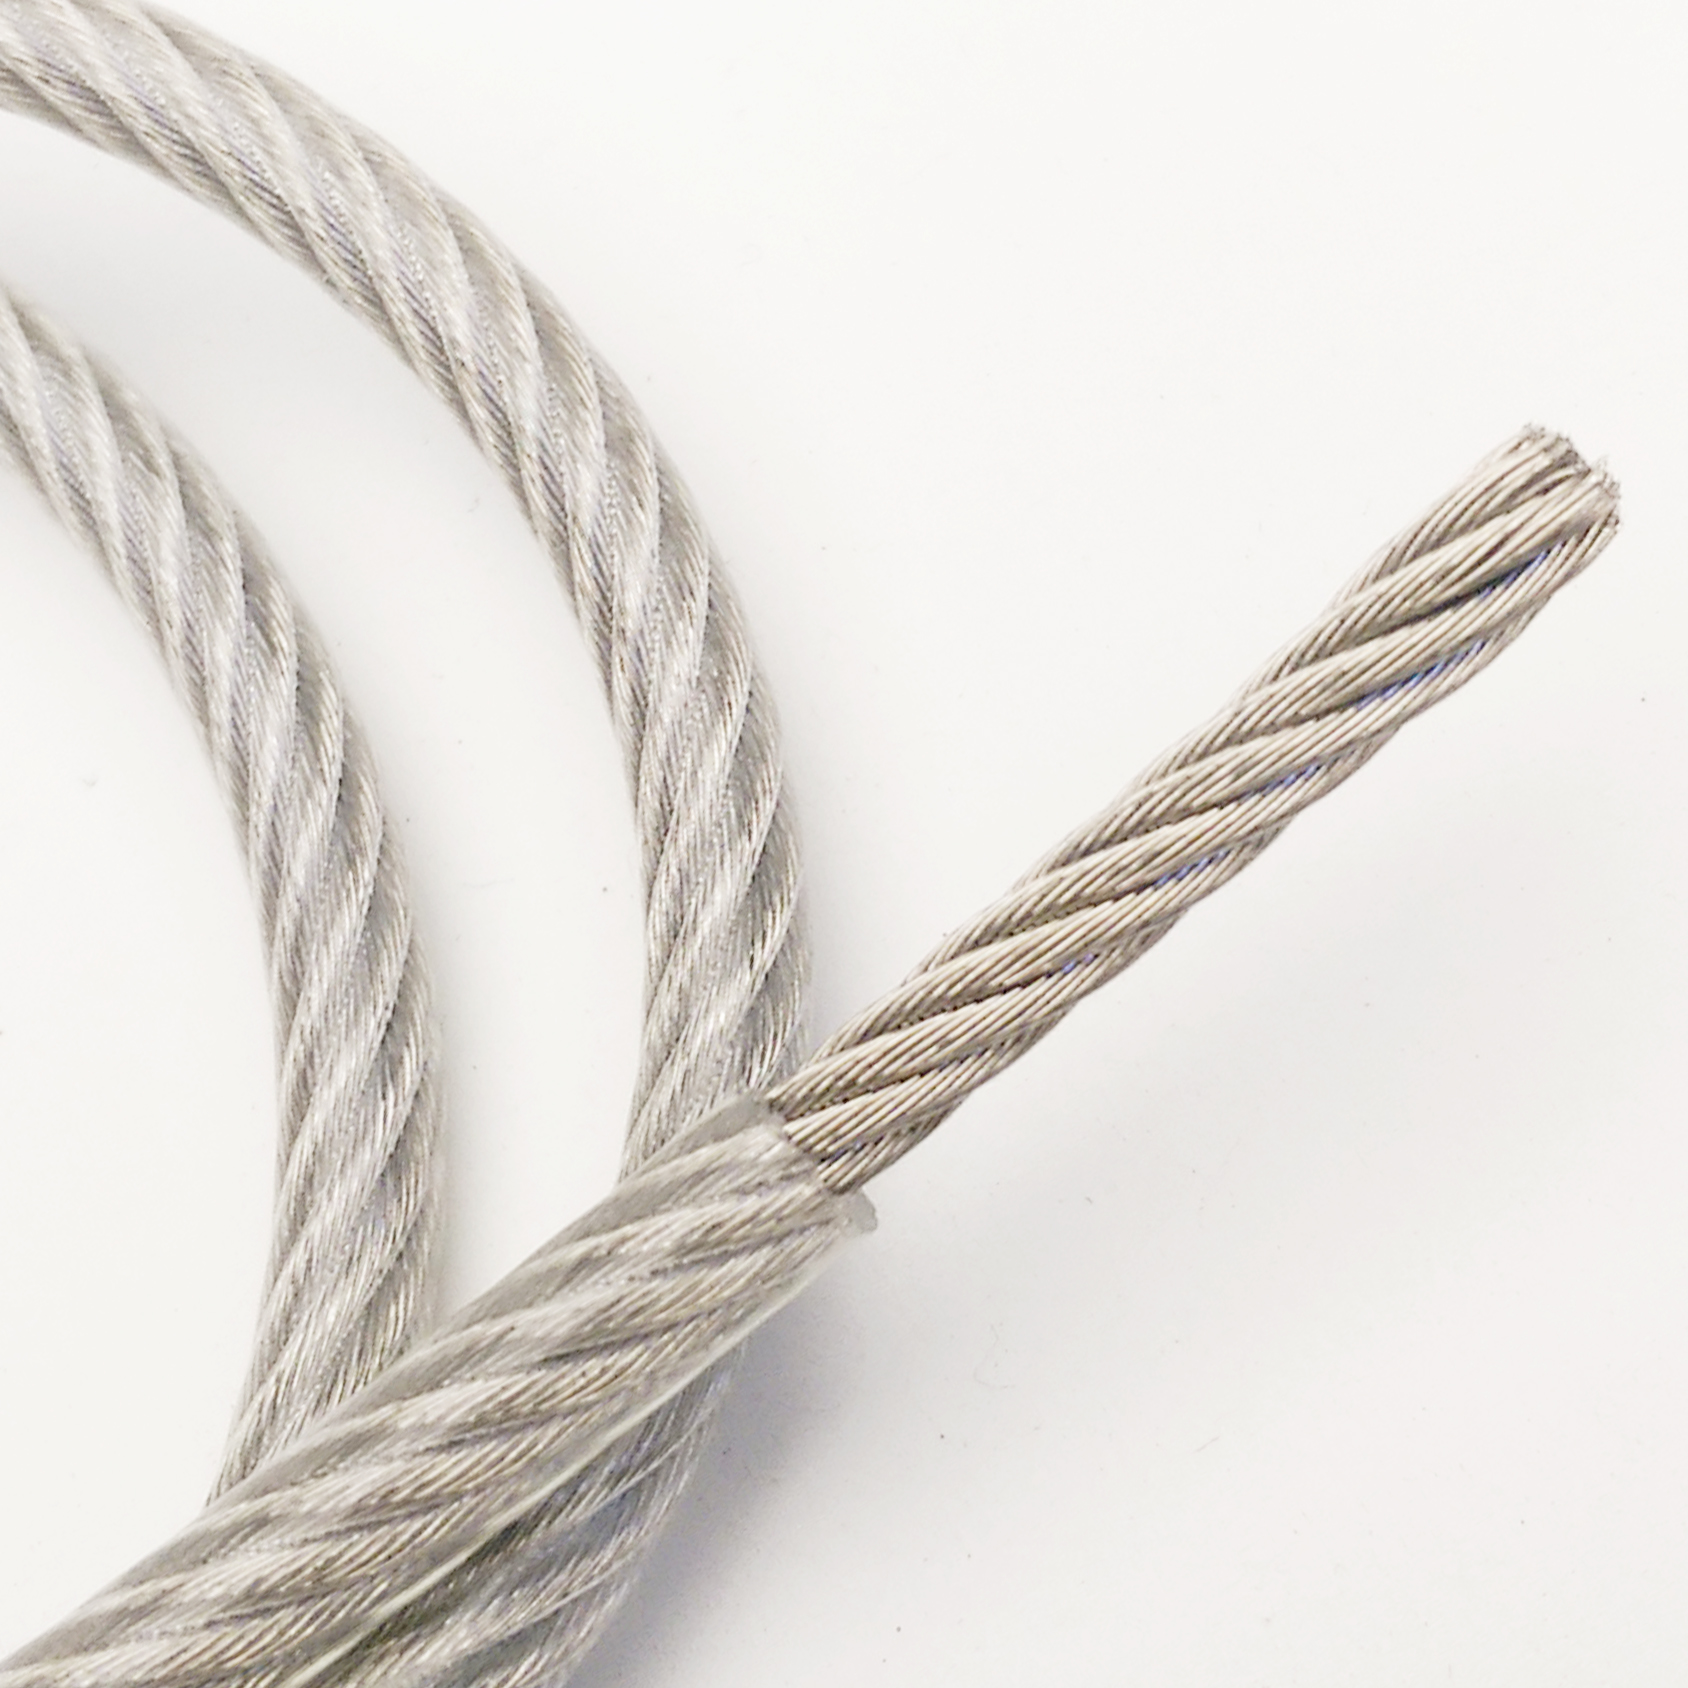 Galvanised Wire Rope 2 Metre of 3mm of 7x7 Construction Handy Straps 